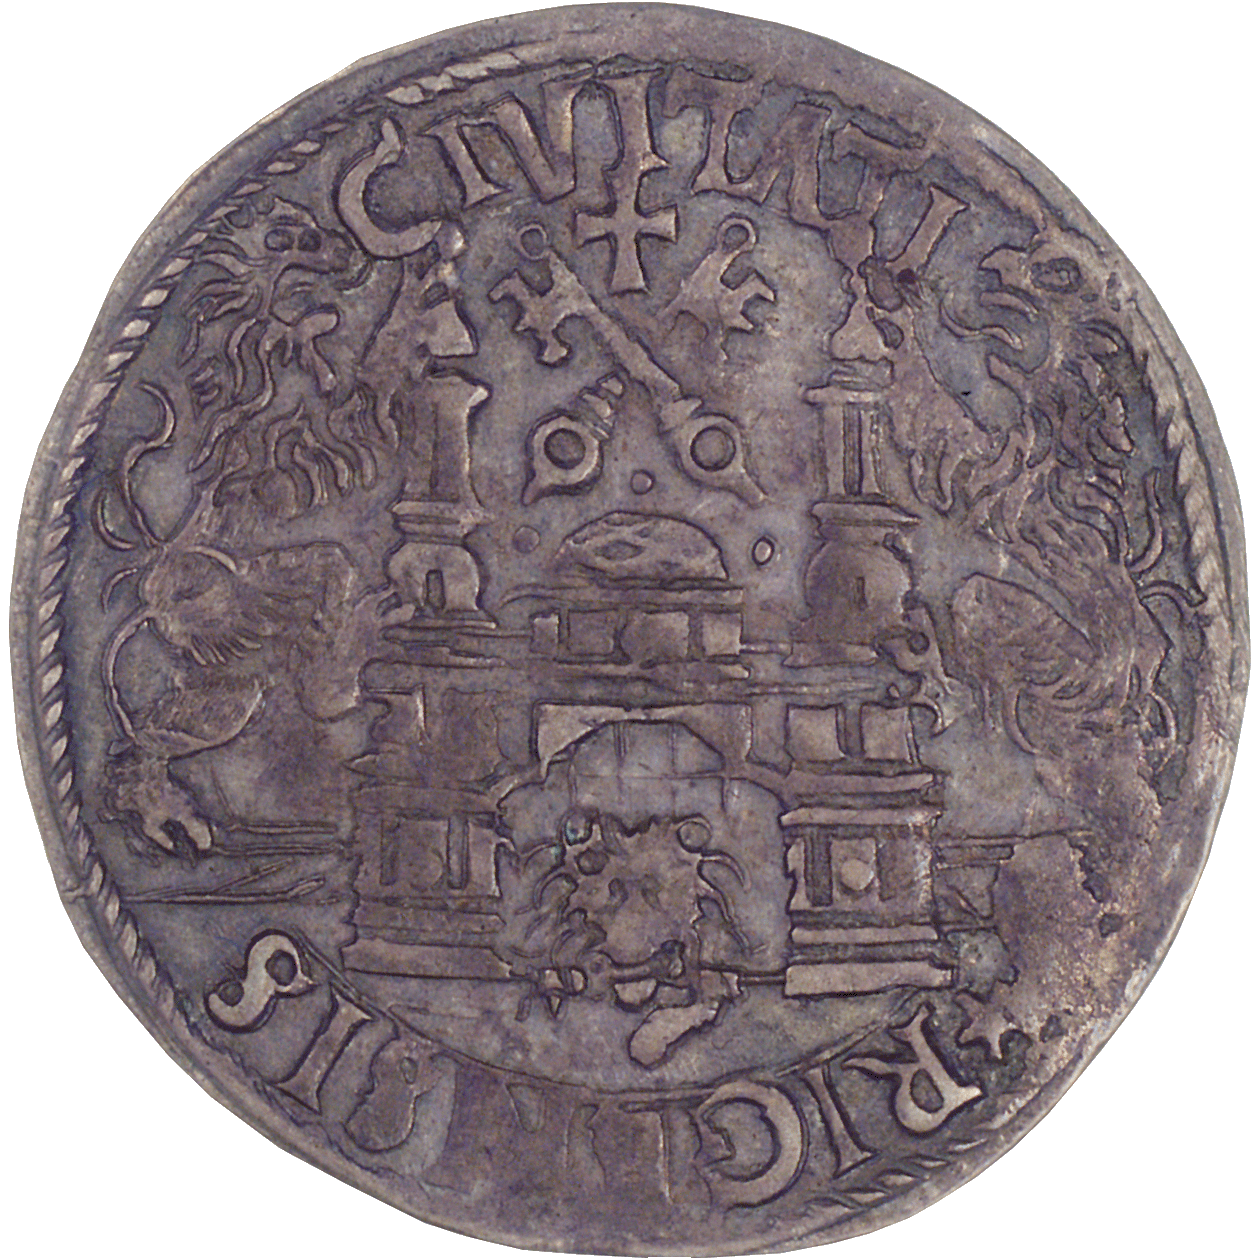 Free and Hanseatic City of Riga, 1/2 Mark (obverse)